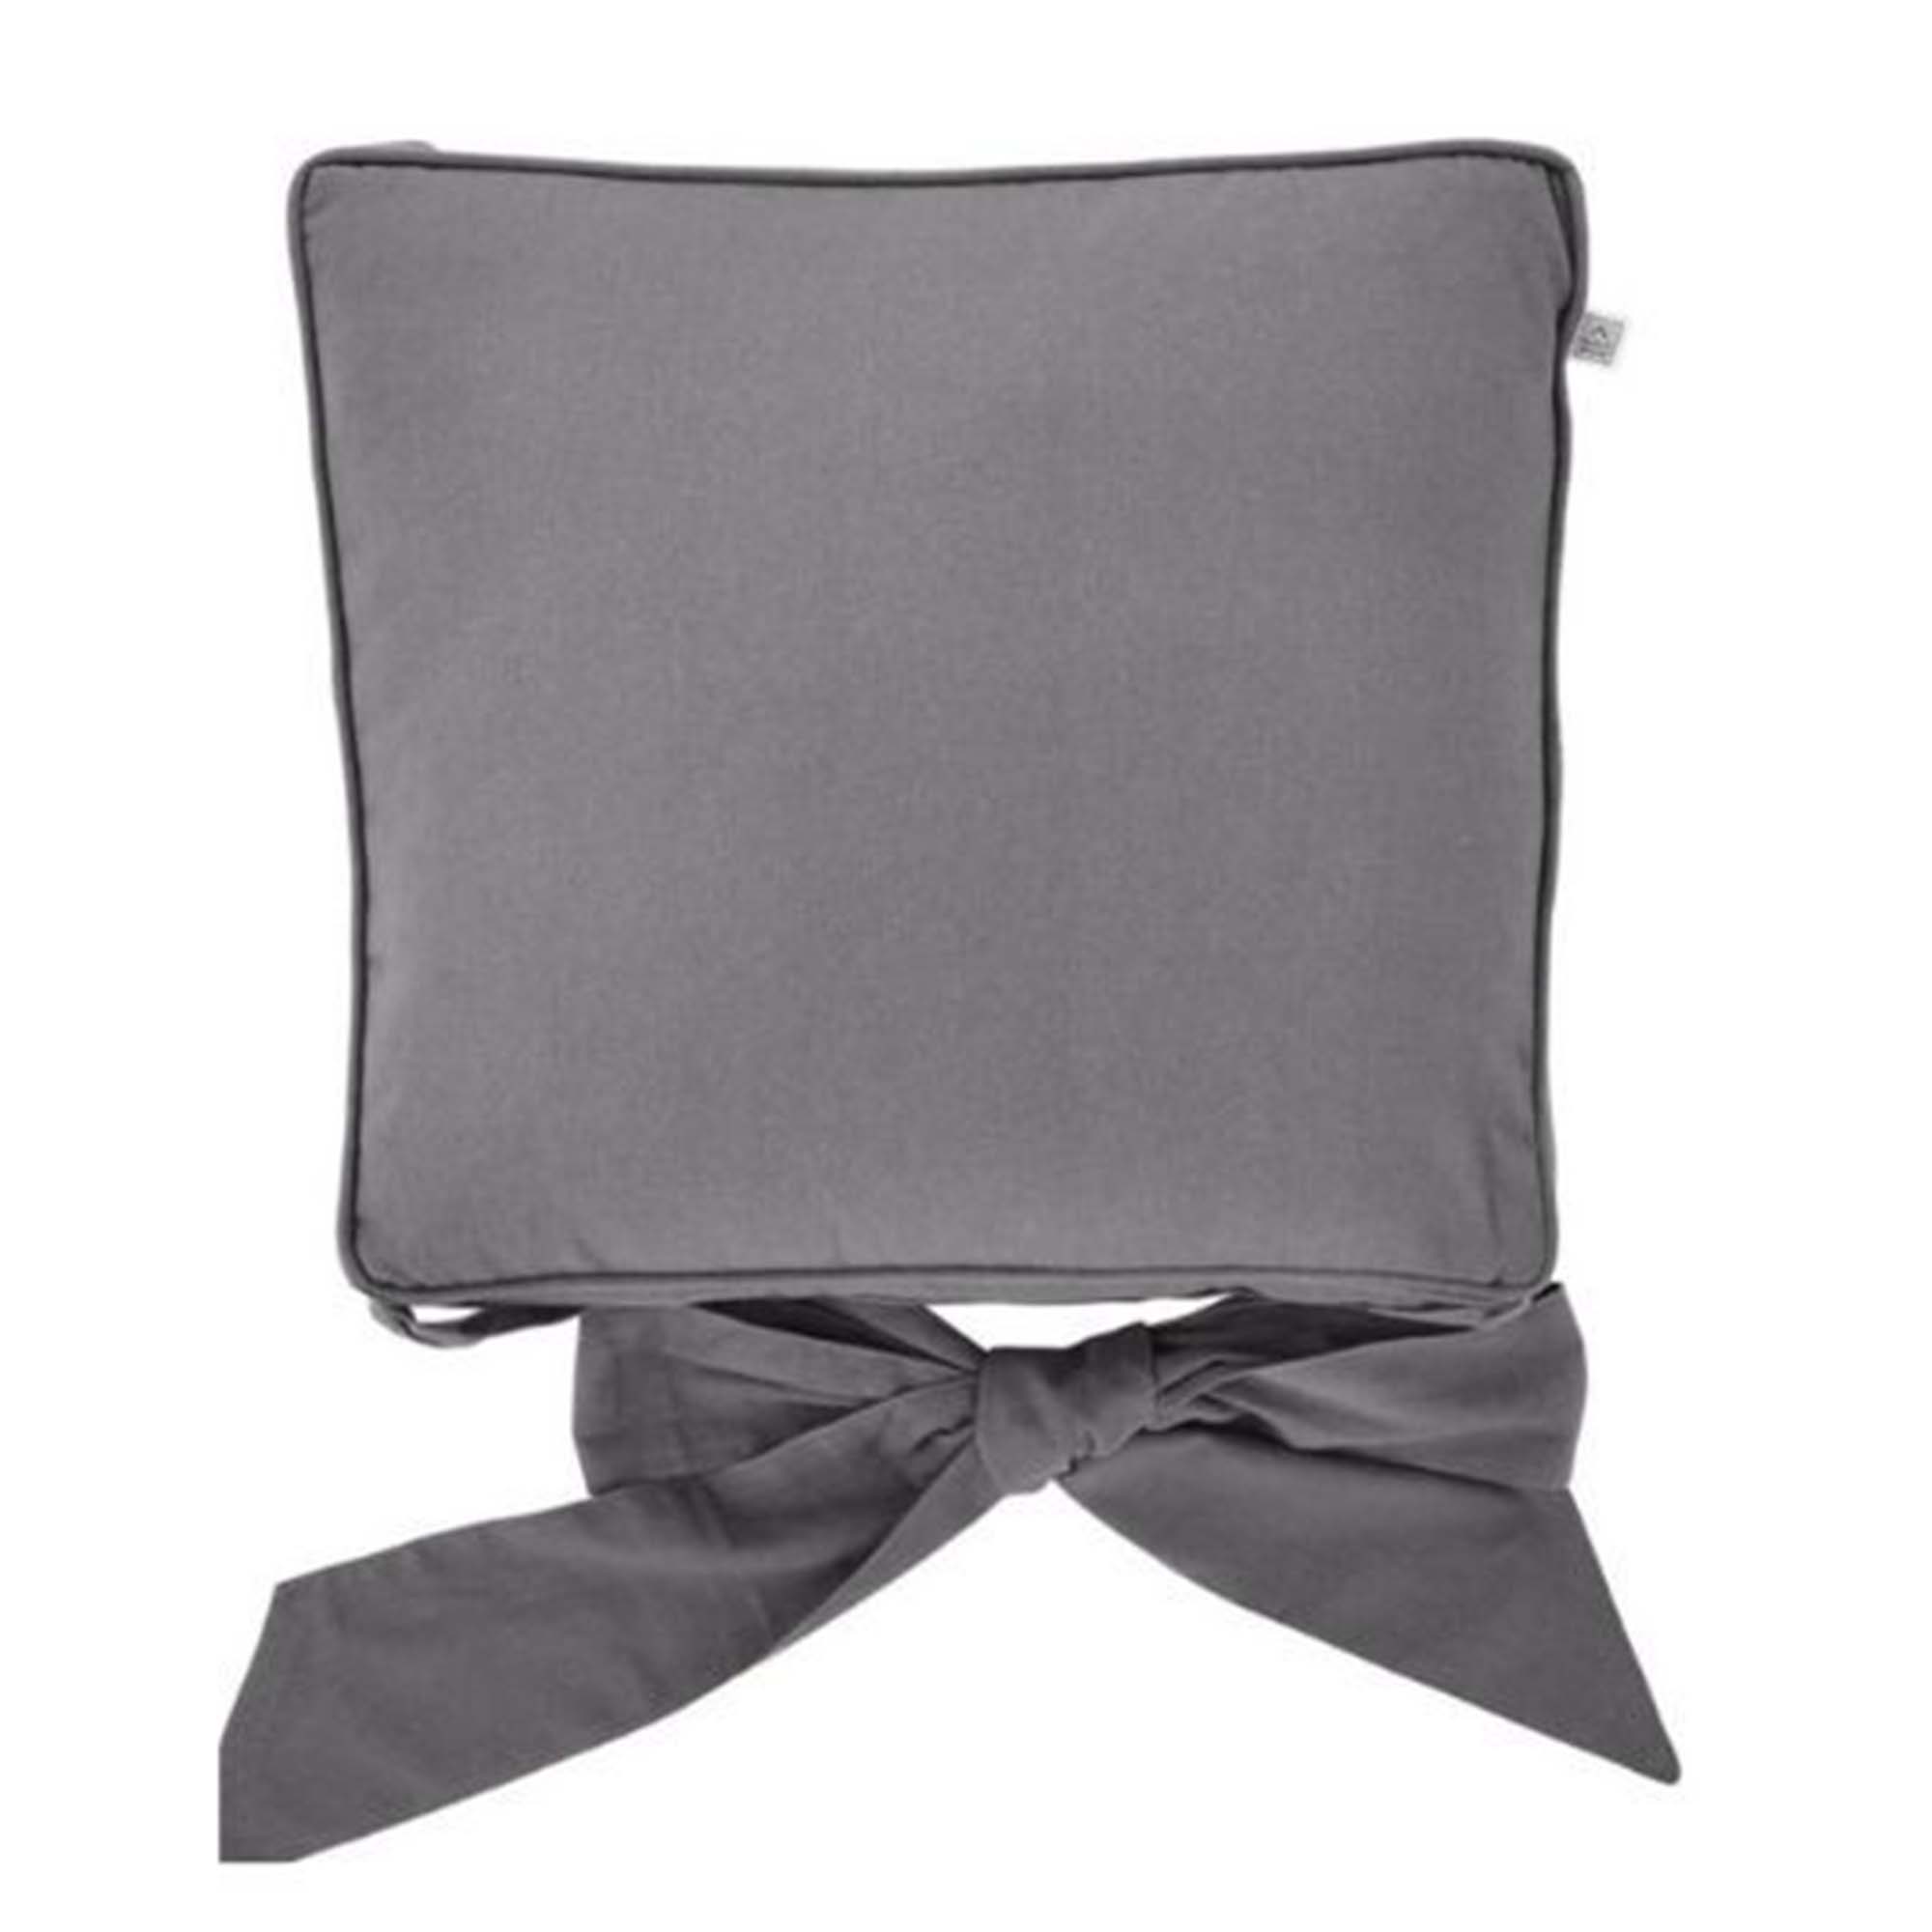 JAVAAN - Seat pad cushion cover with ties Charcoal gray 45x45 cm